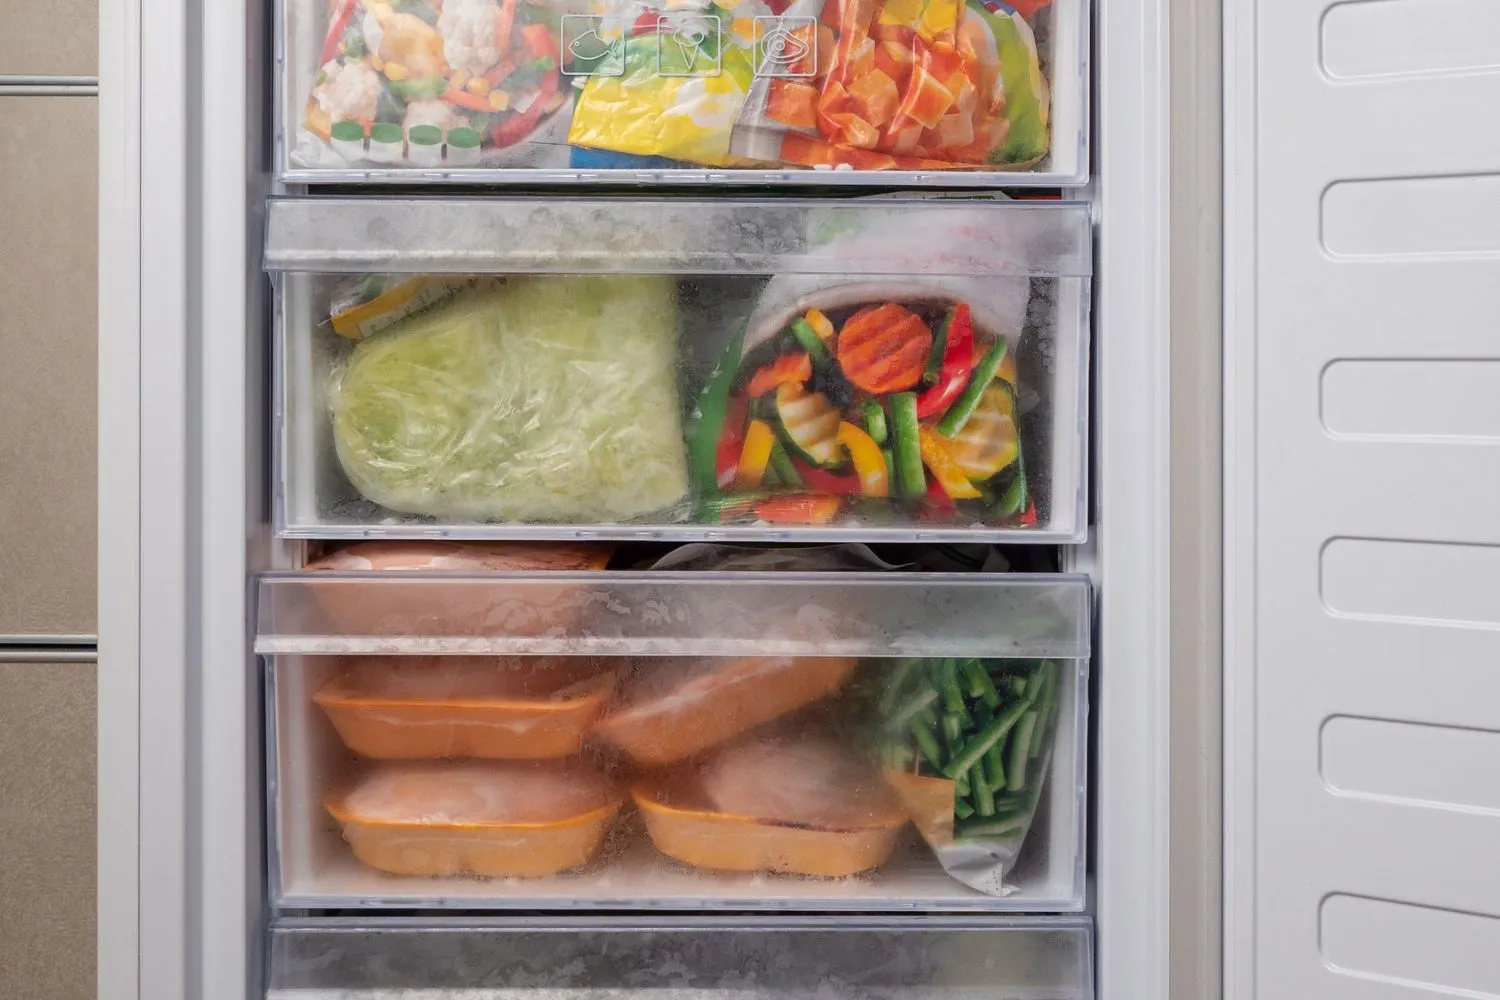 How To Clean Out Your Freezer Without Defrosting It